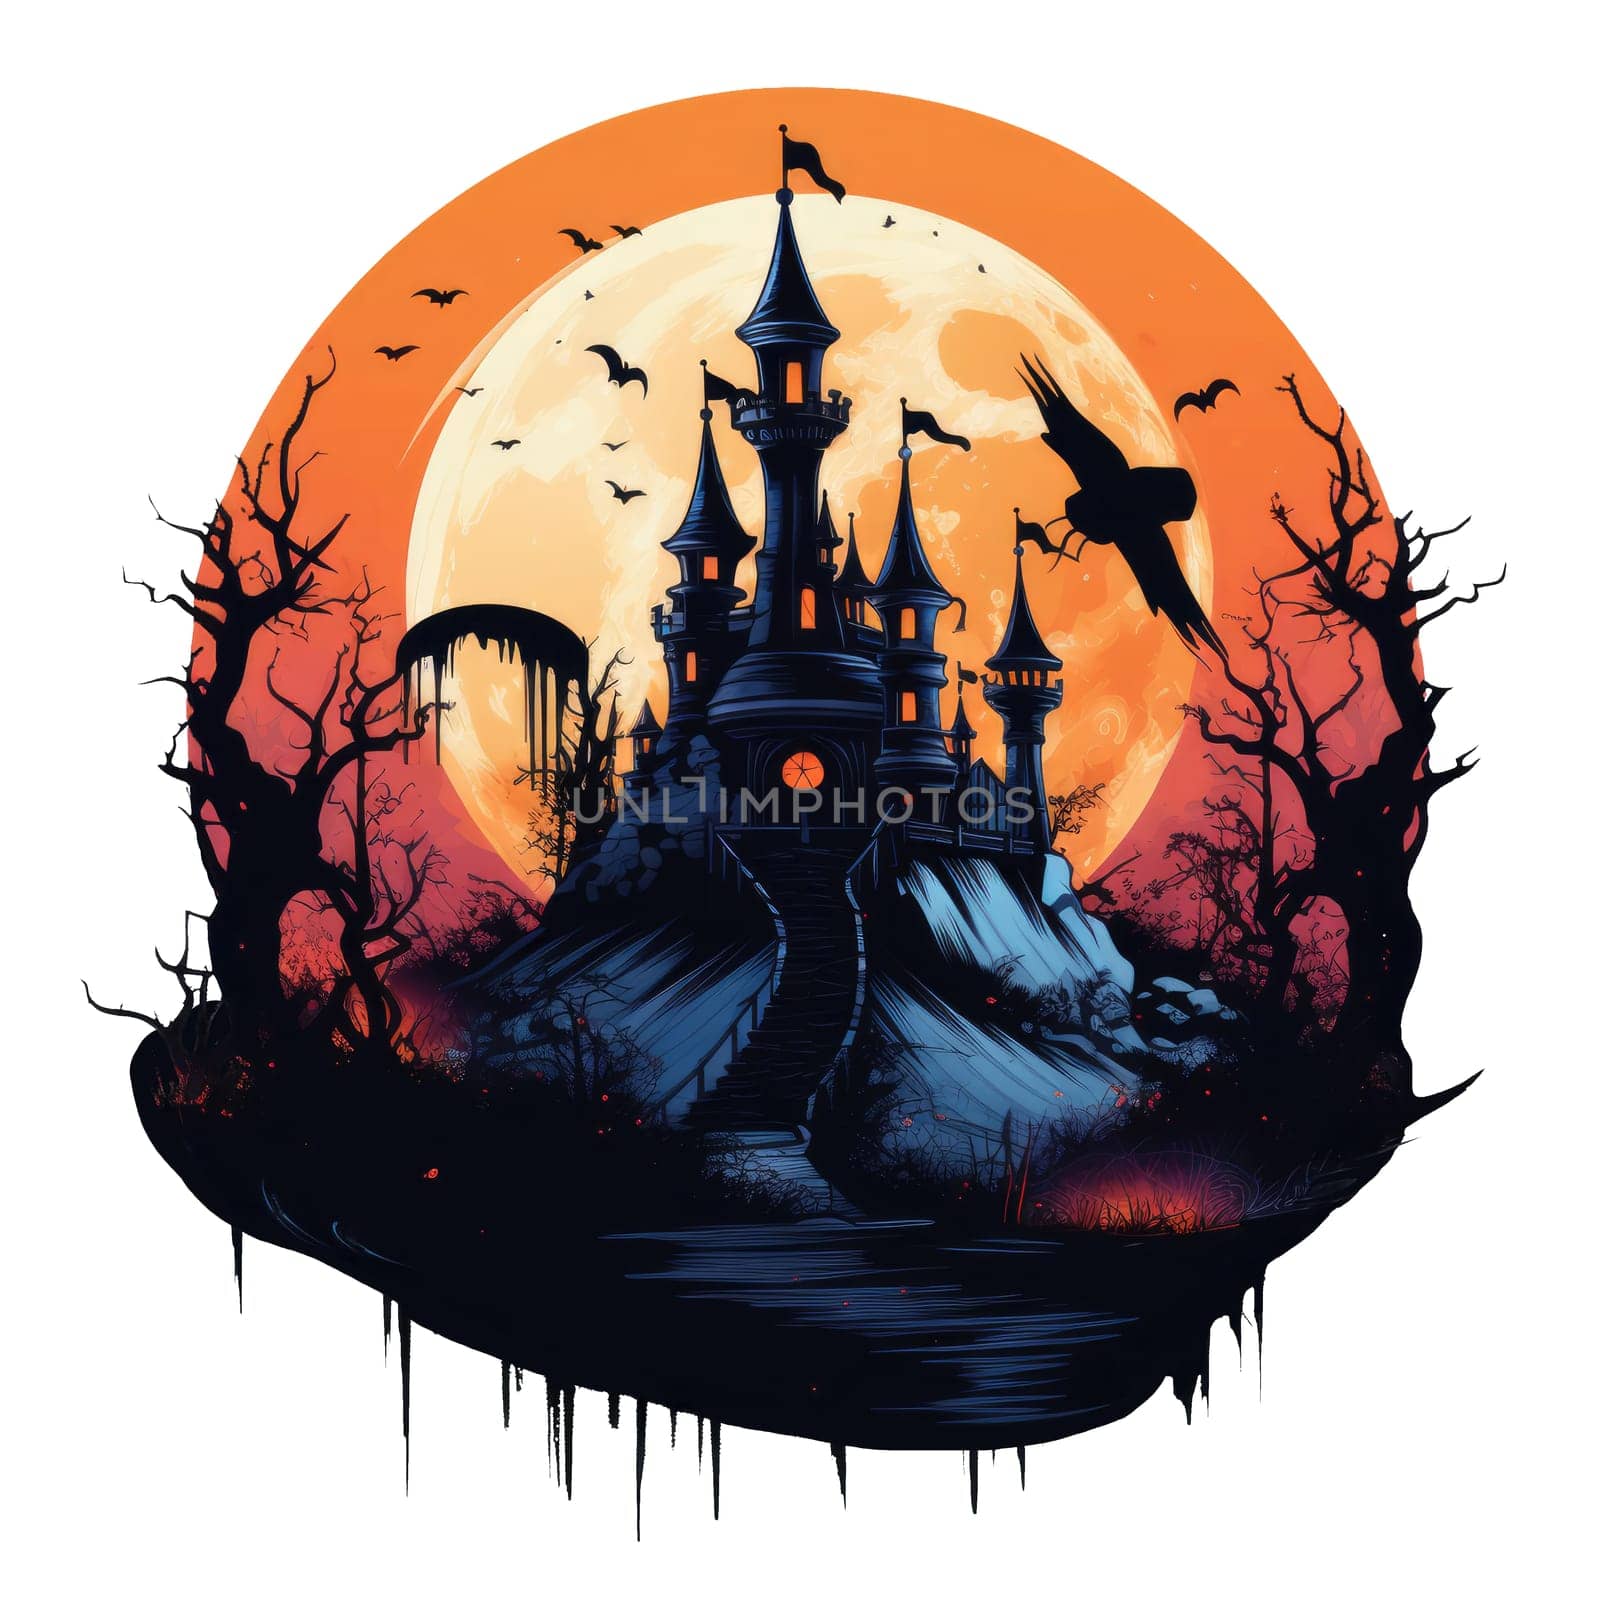 T-shirt or round poster design with castle Halloween theme on white by natali_brill